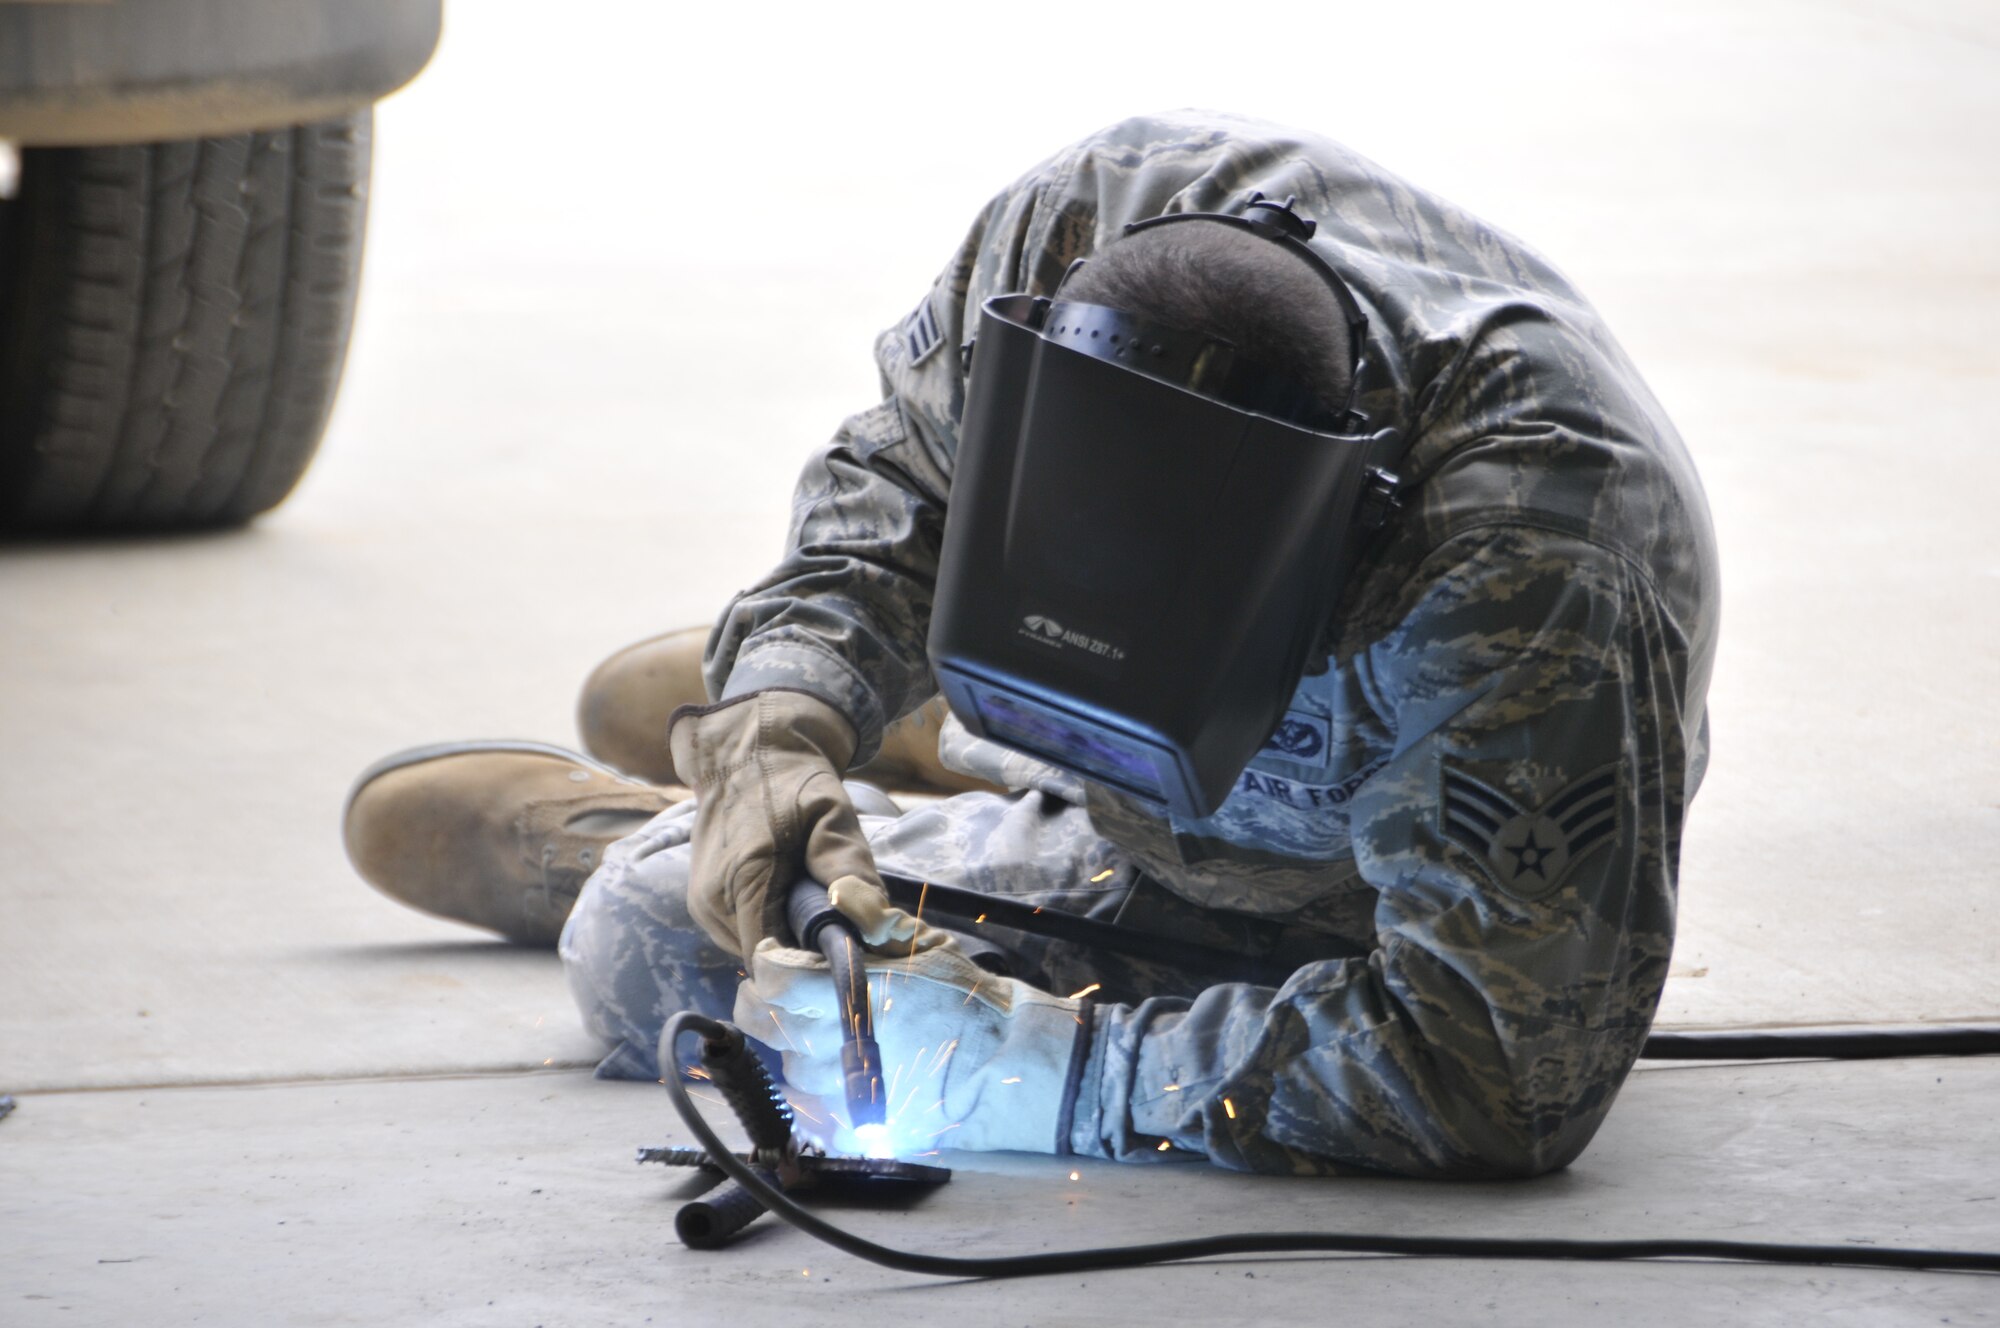 Senior Airman Angelina Duncan of the 210th Rapid Engineer Deployable Heavy Operational Repair Squadron Engineer (REDHORSE) Squadron, New Mexico Air National Guard welds during a course held at Ebbing Air National Guard Base, Fort Smith, Ark., on Sept. 17, 2014. Six Airmen from the 210th were trained by the 188th Civil Engineering Squadron led by Tech. Sgt. Bryan Sutton, 188th REDHORSE welding instructor. (U.S. Air National Guard photo by Tech. Sgt. Josh Lewis/Released)